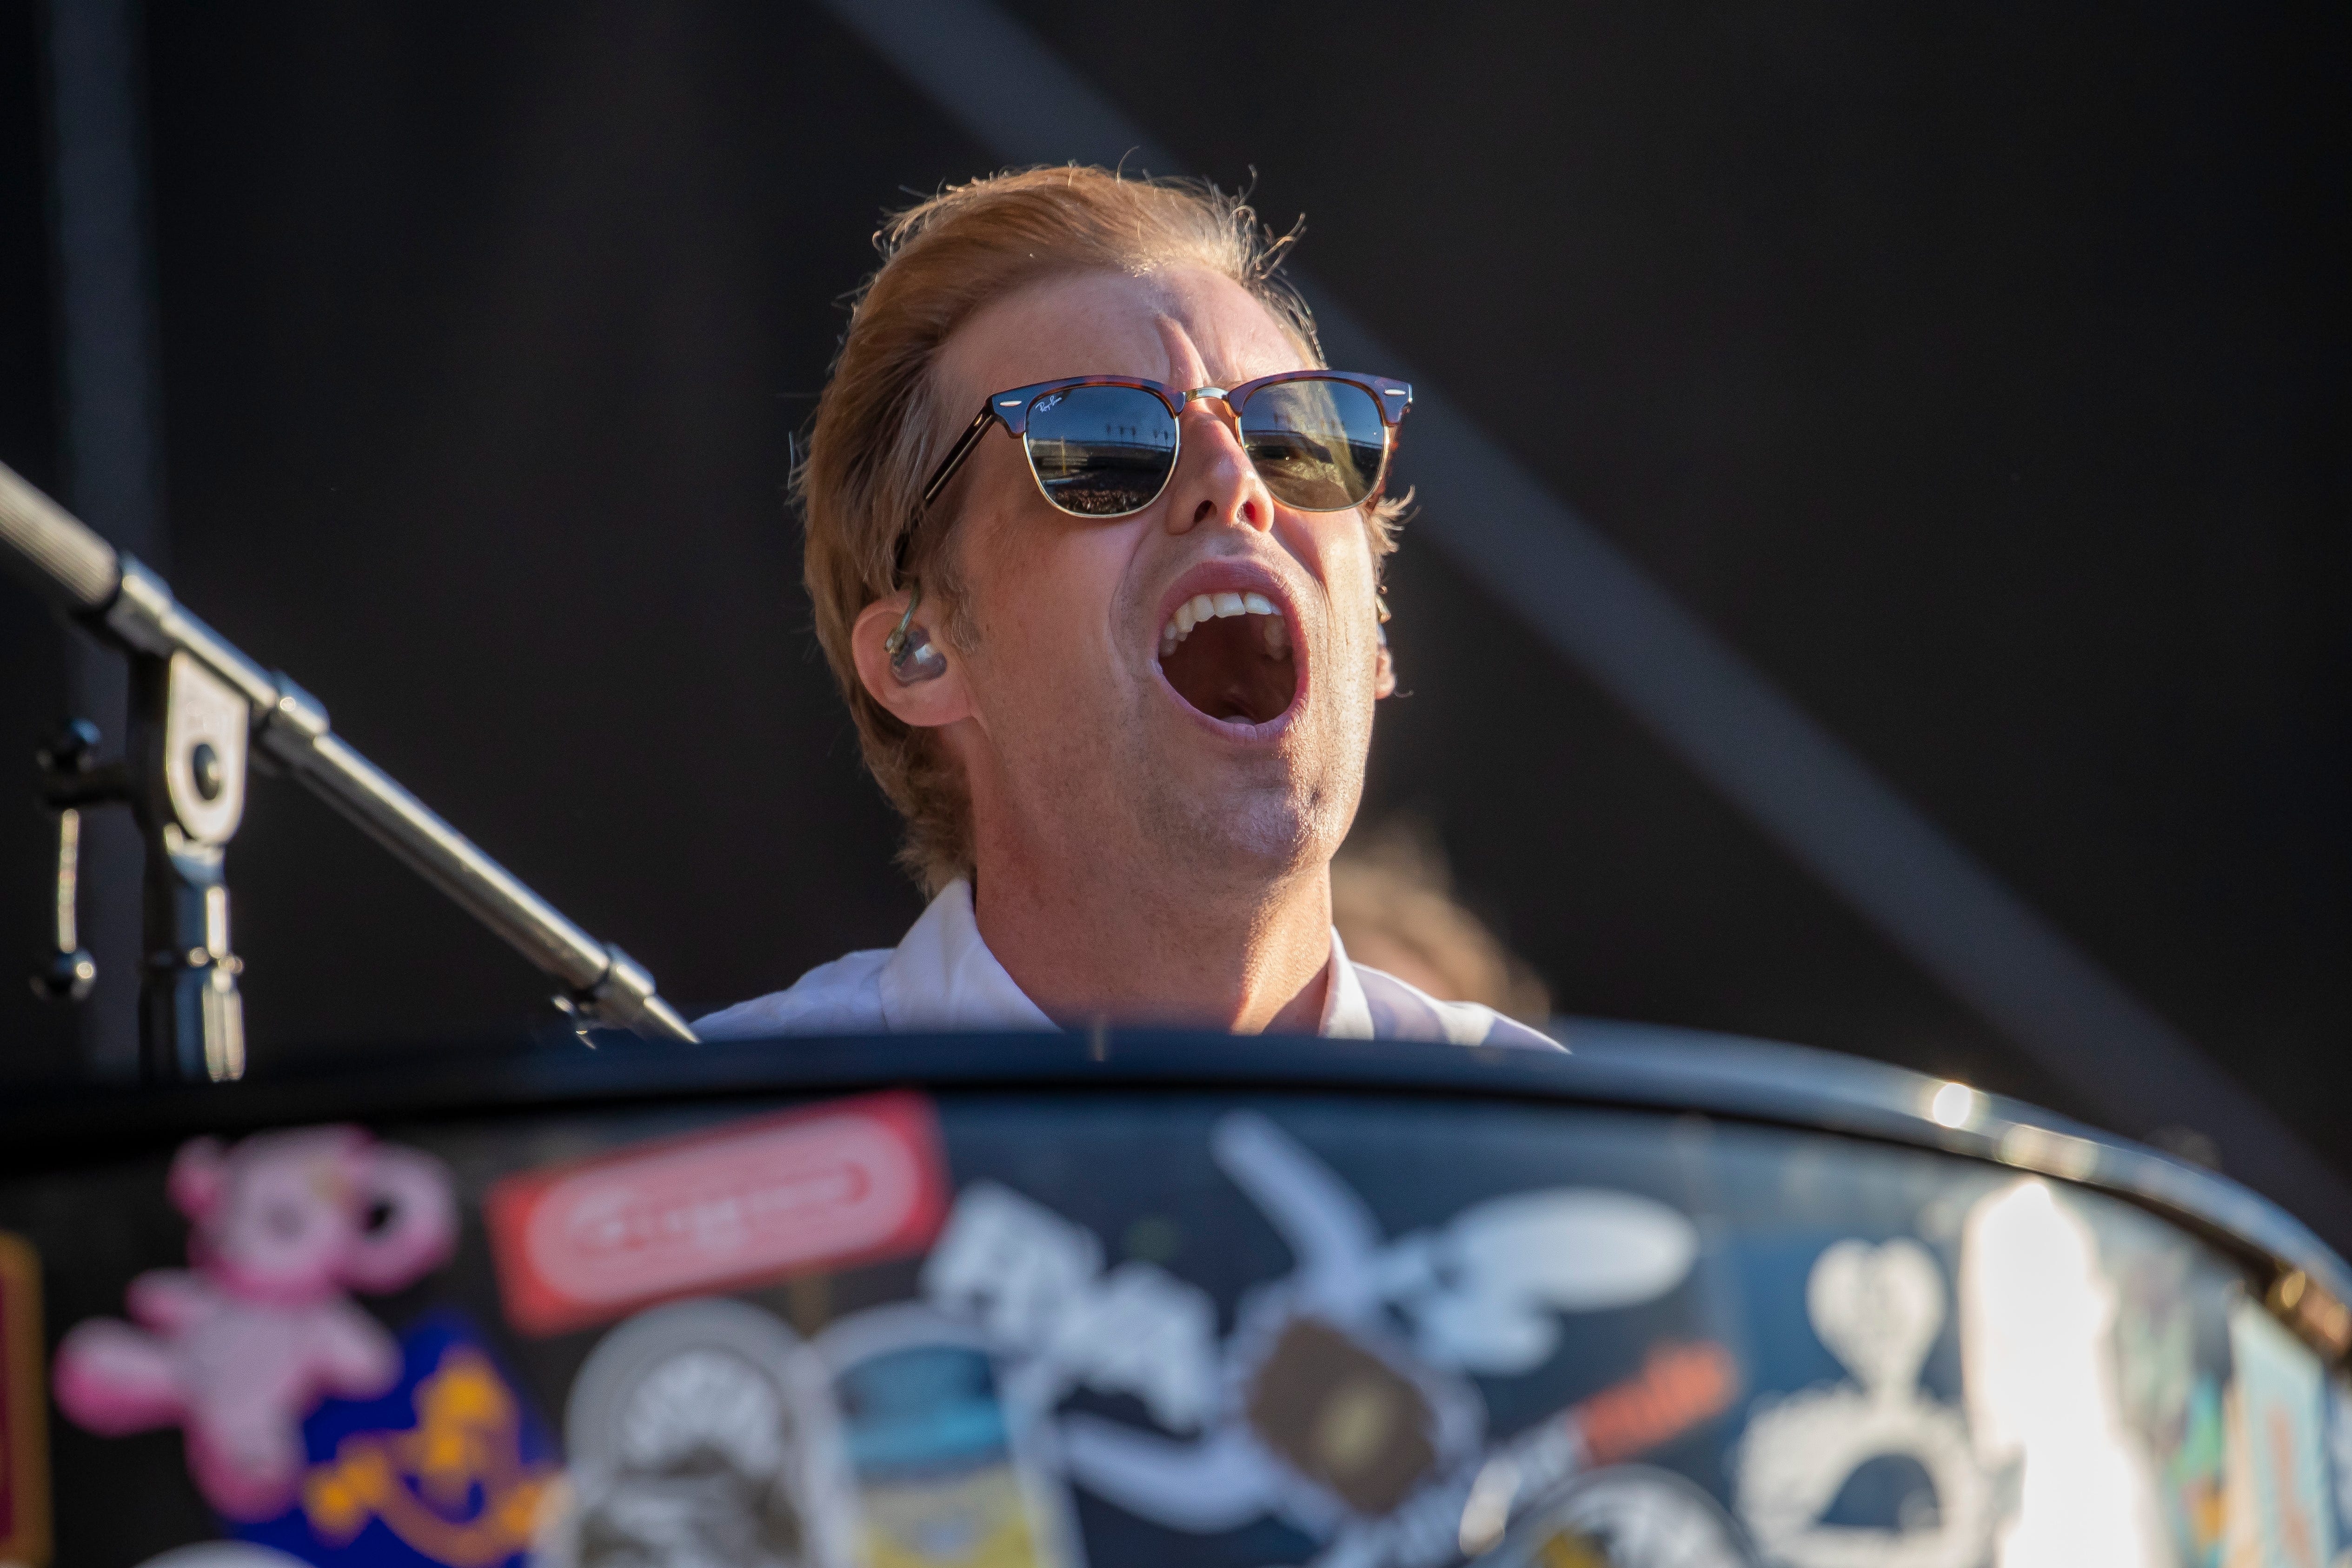 Andrew McMahon opens for Billy Joel at Comerica Park in Detroit.